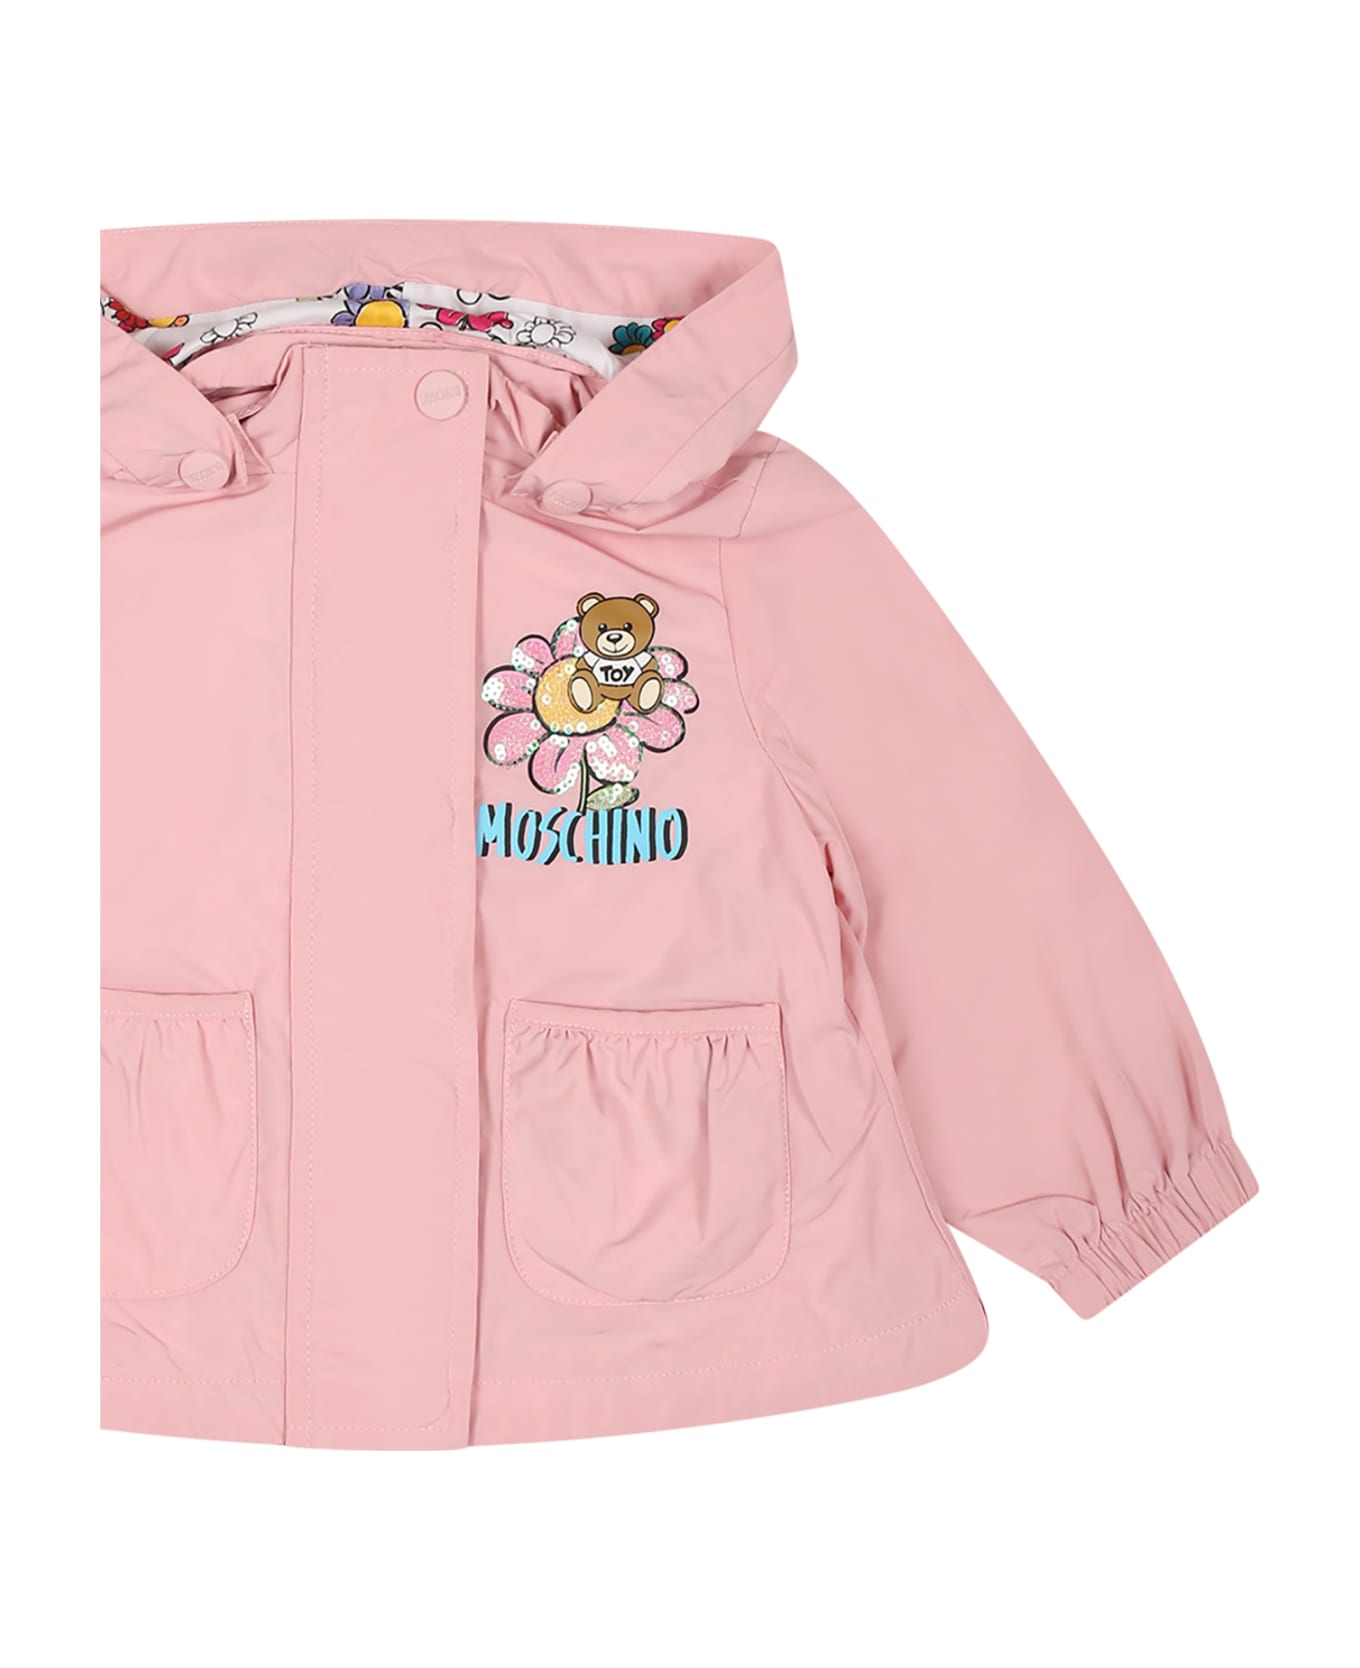 Moschino Pink Raincoat For Baby Girl With Teddy Bear And Logo - Pink コート＆ジャケット